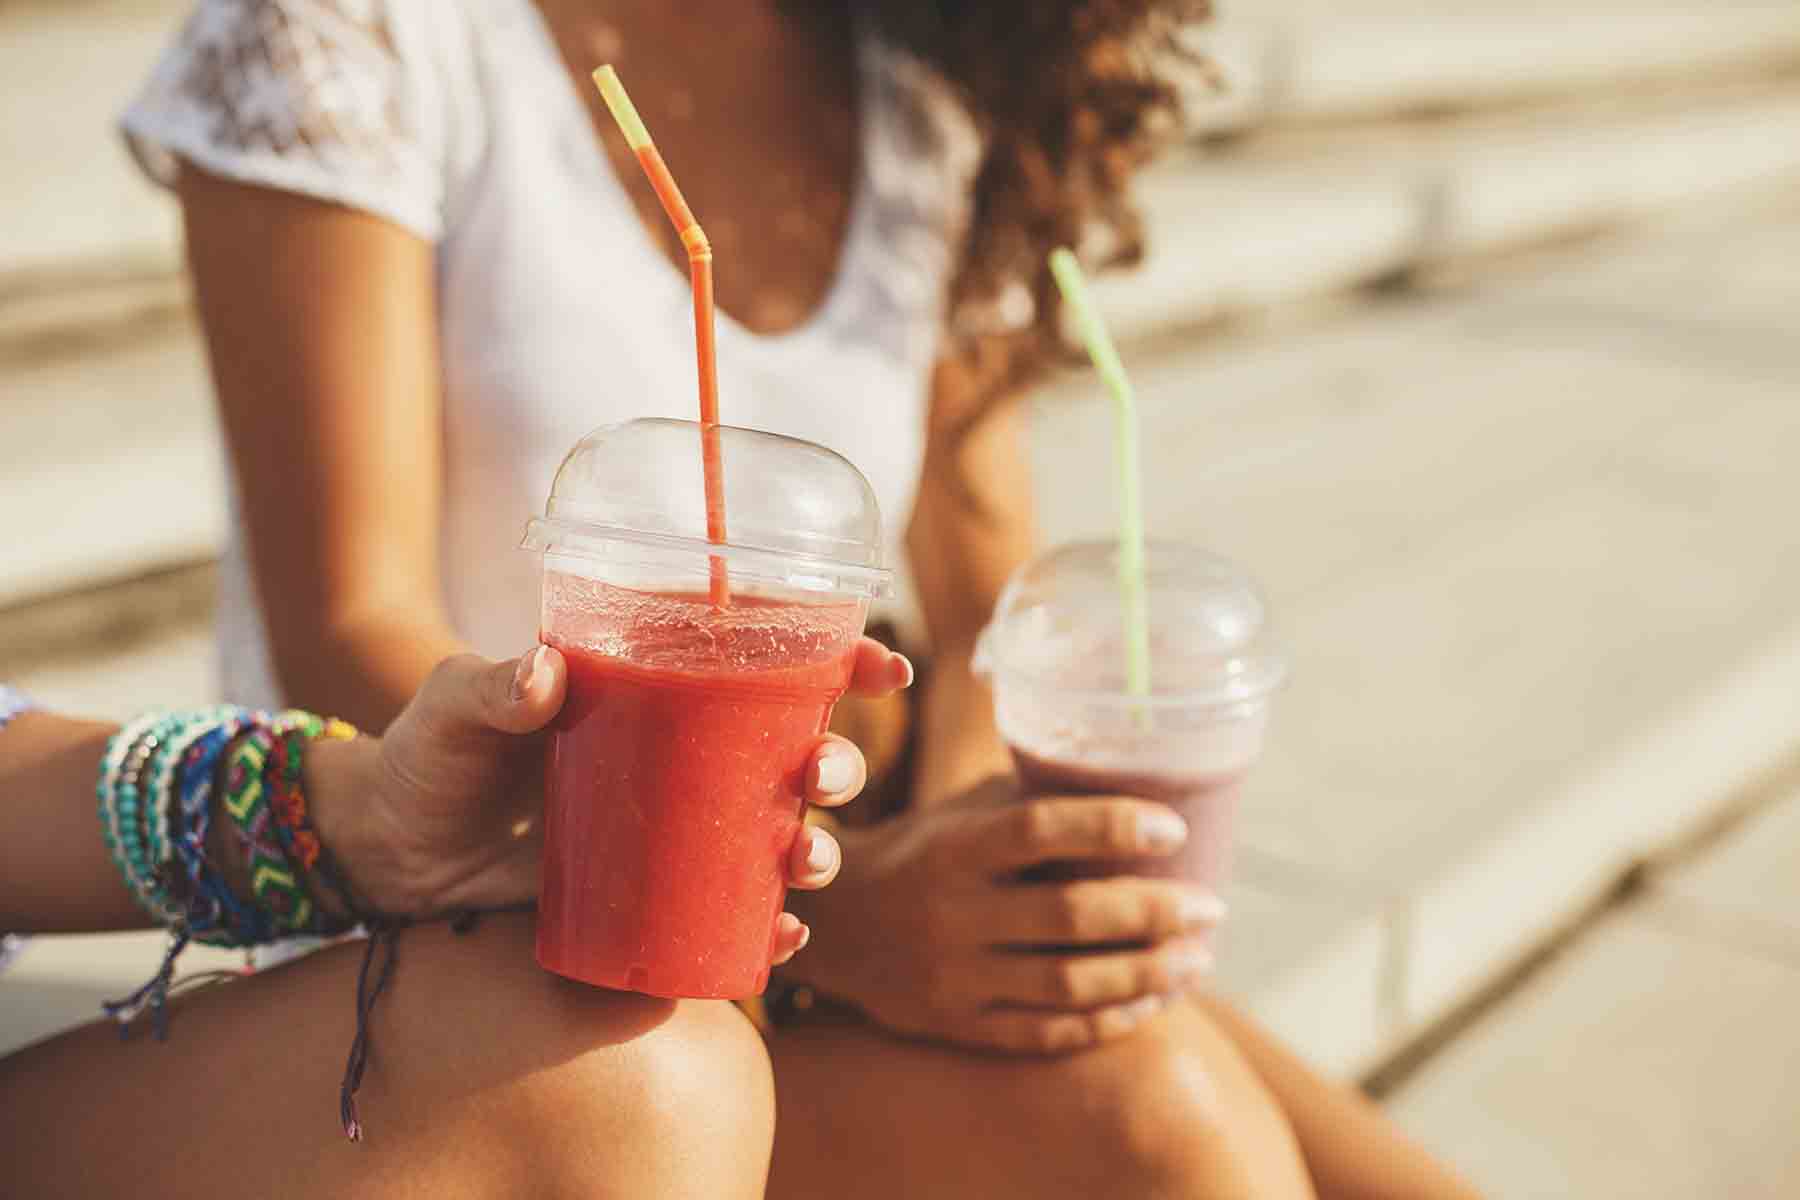 Two girl friends enjoying fresh smoothies together